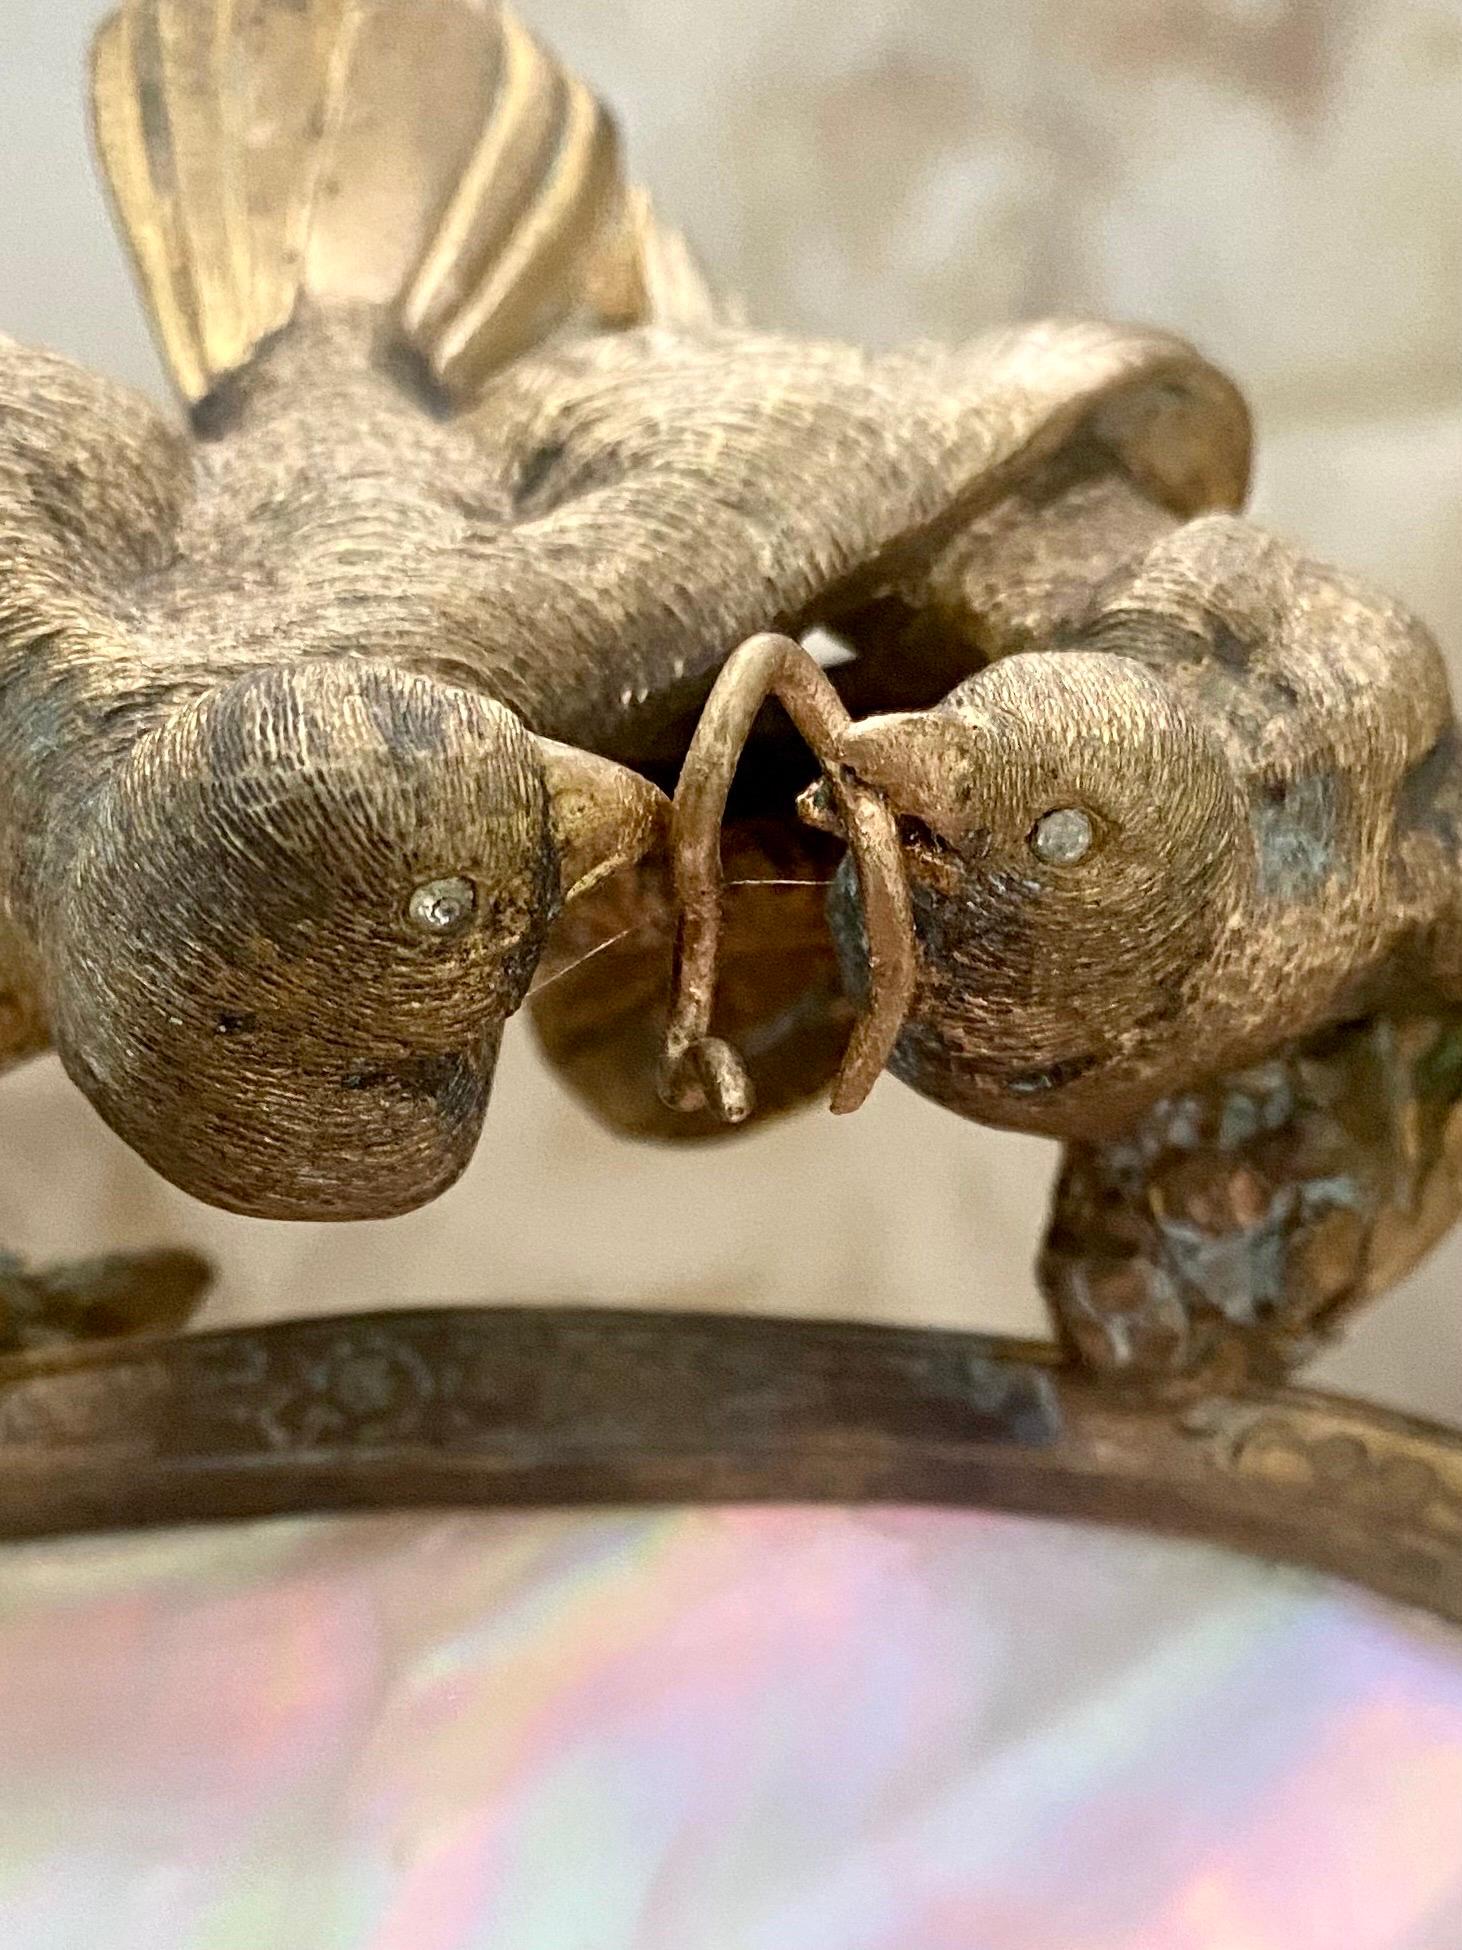 Intricate French gilt bronze work depicting lovebirds sharing a worm above a pearl egg nest upon a tree, while a cobra nestles at the tree base. The work is sublime and the jeweled eyes are exquisite details on this piece. It is beautiful from every